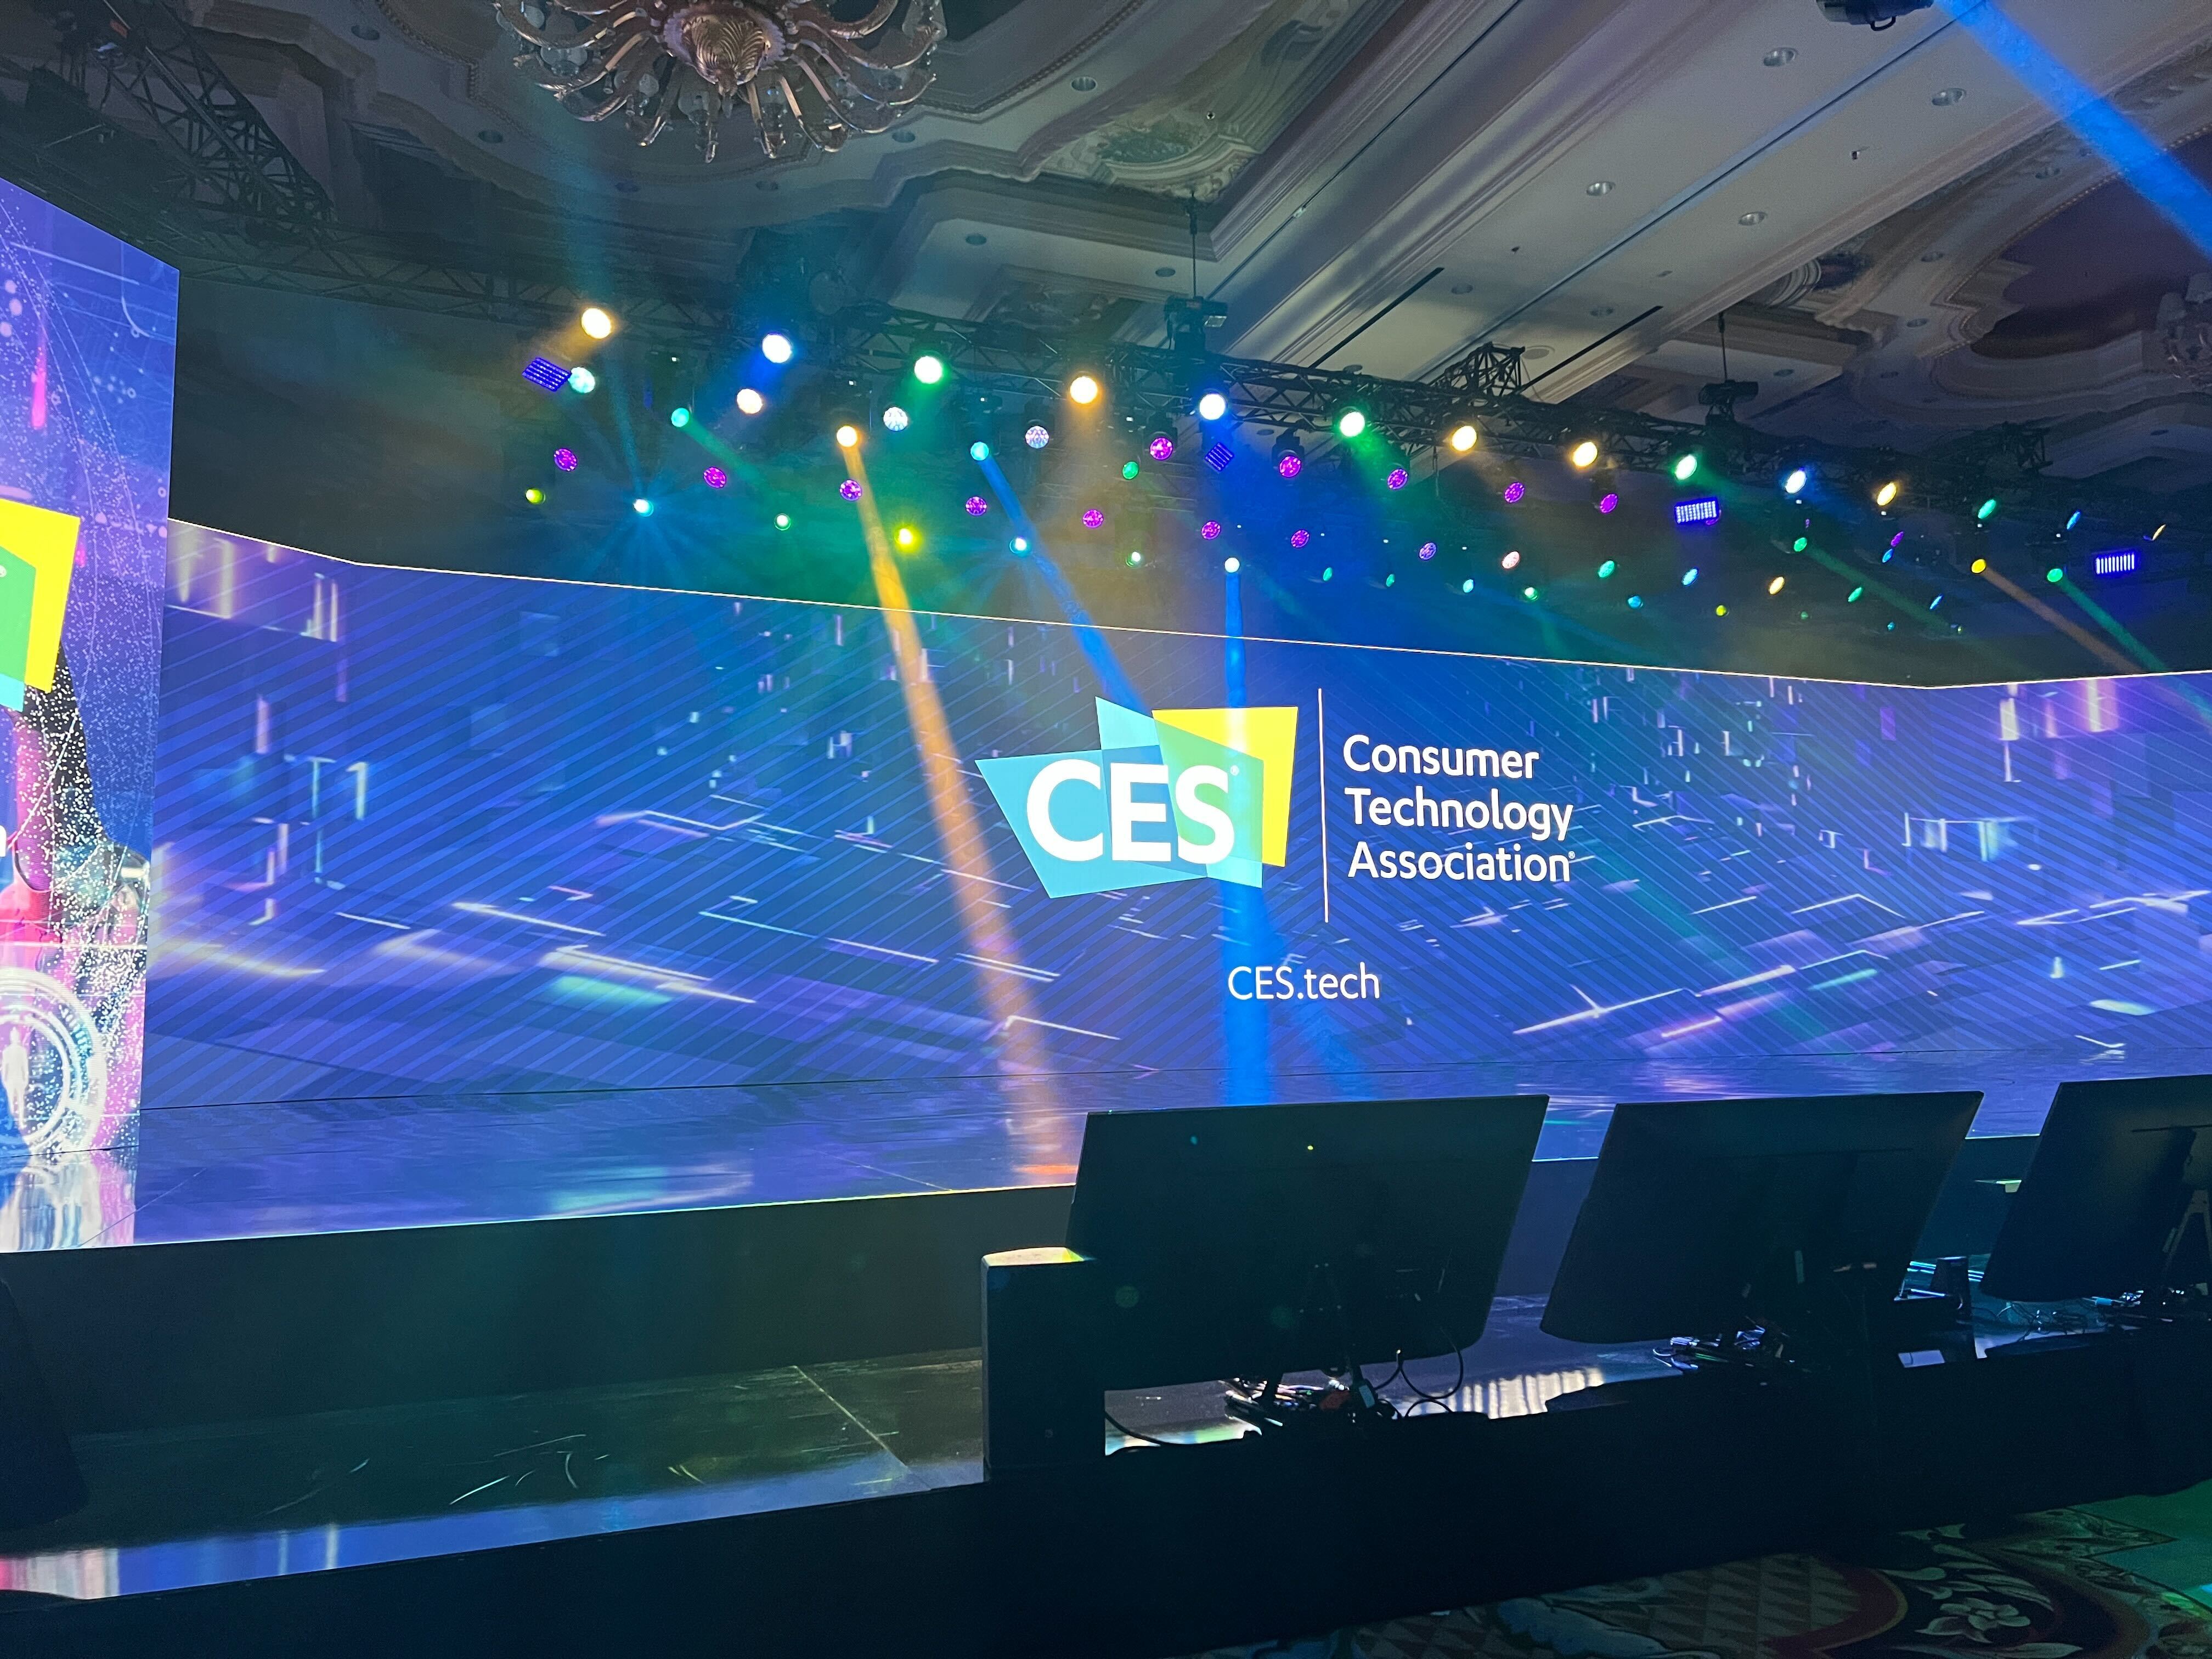 Scenes from AMD's keynote presentation at CES 2023